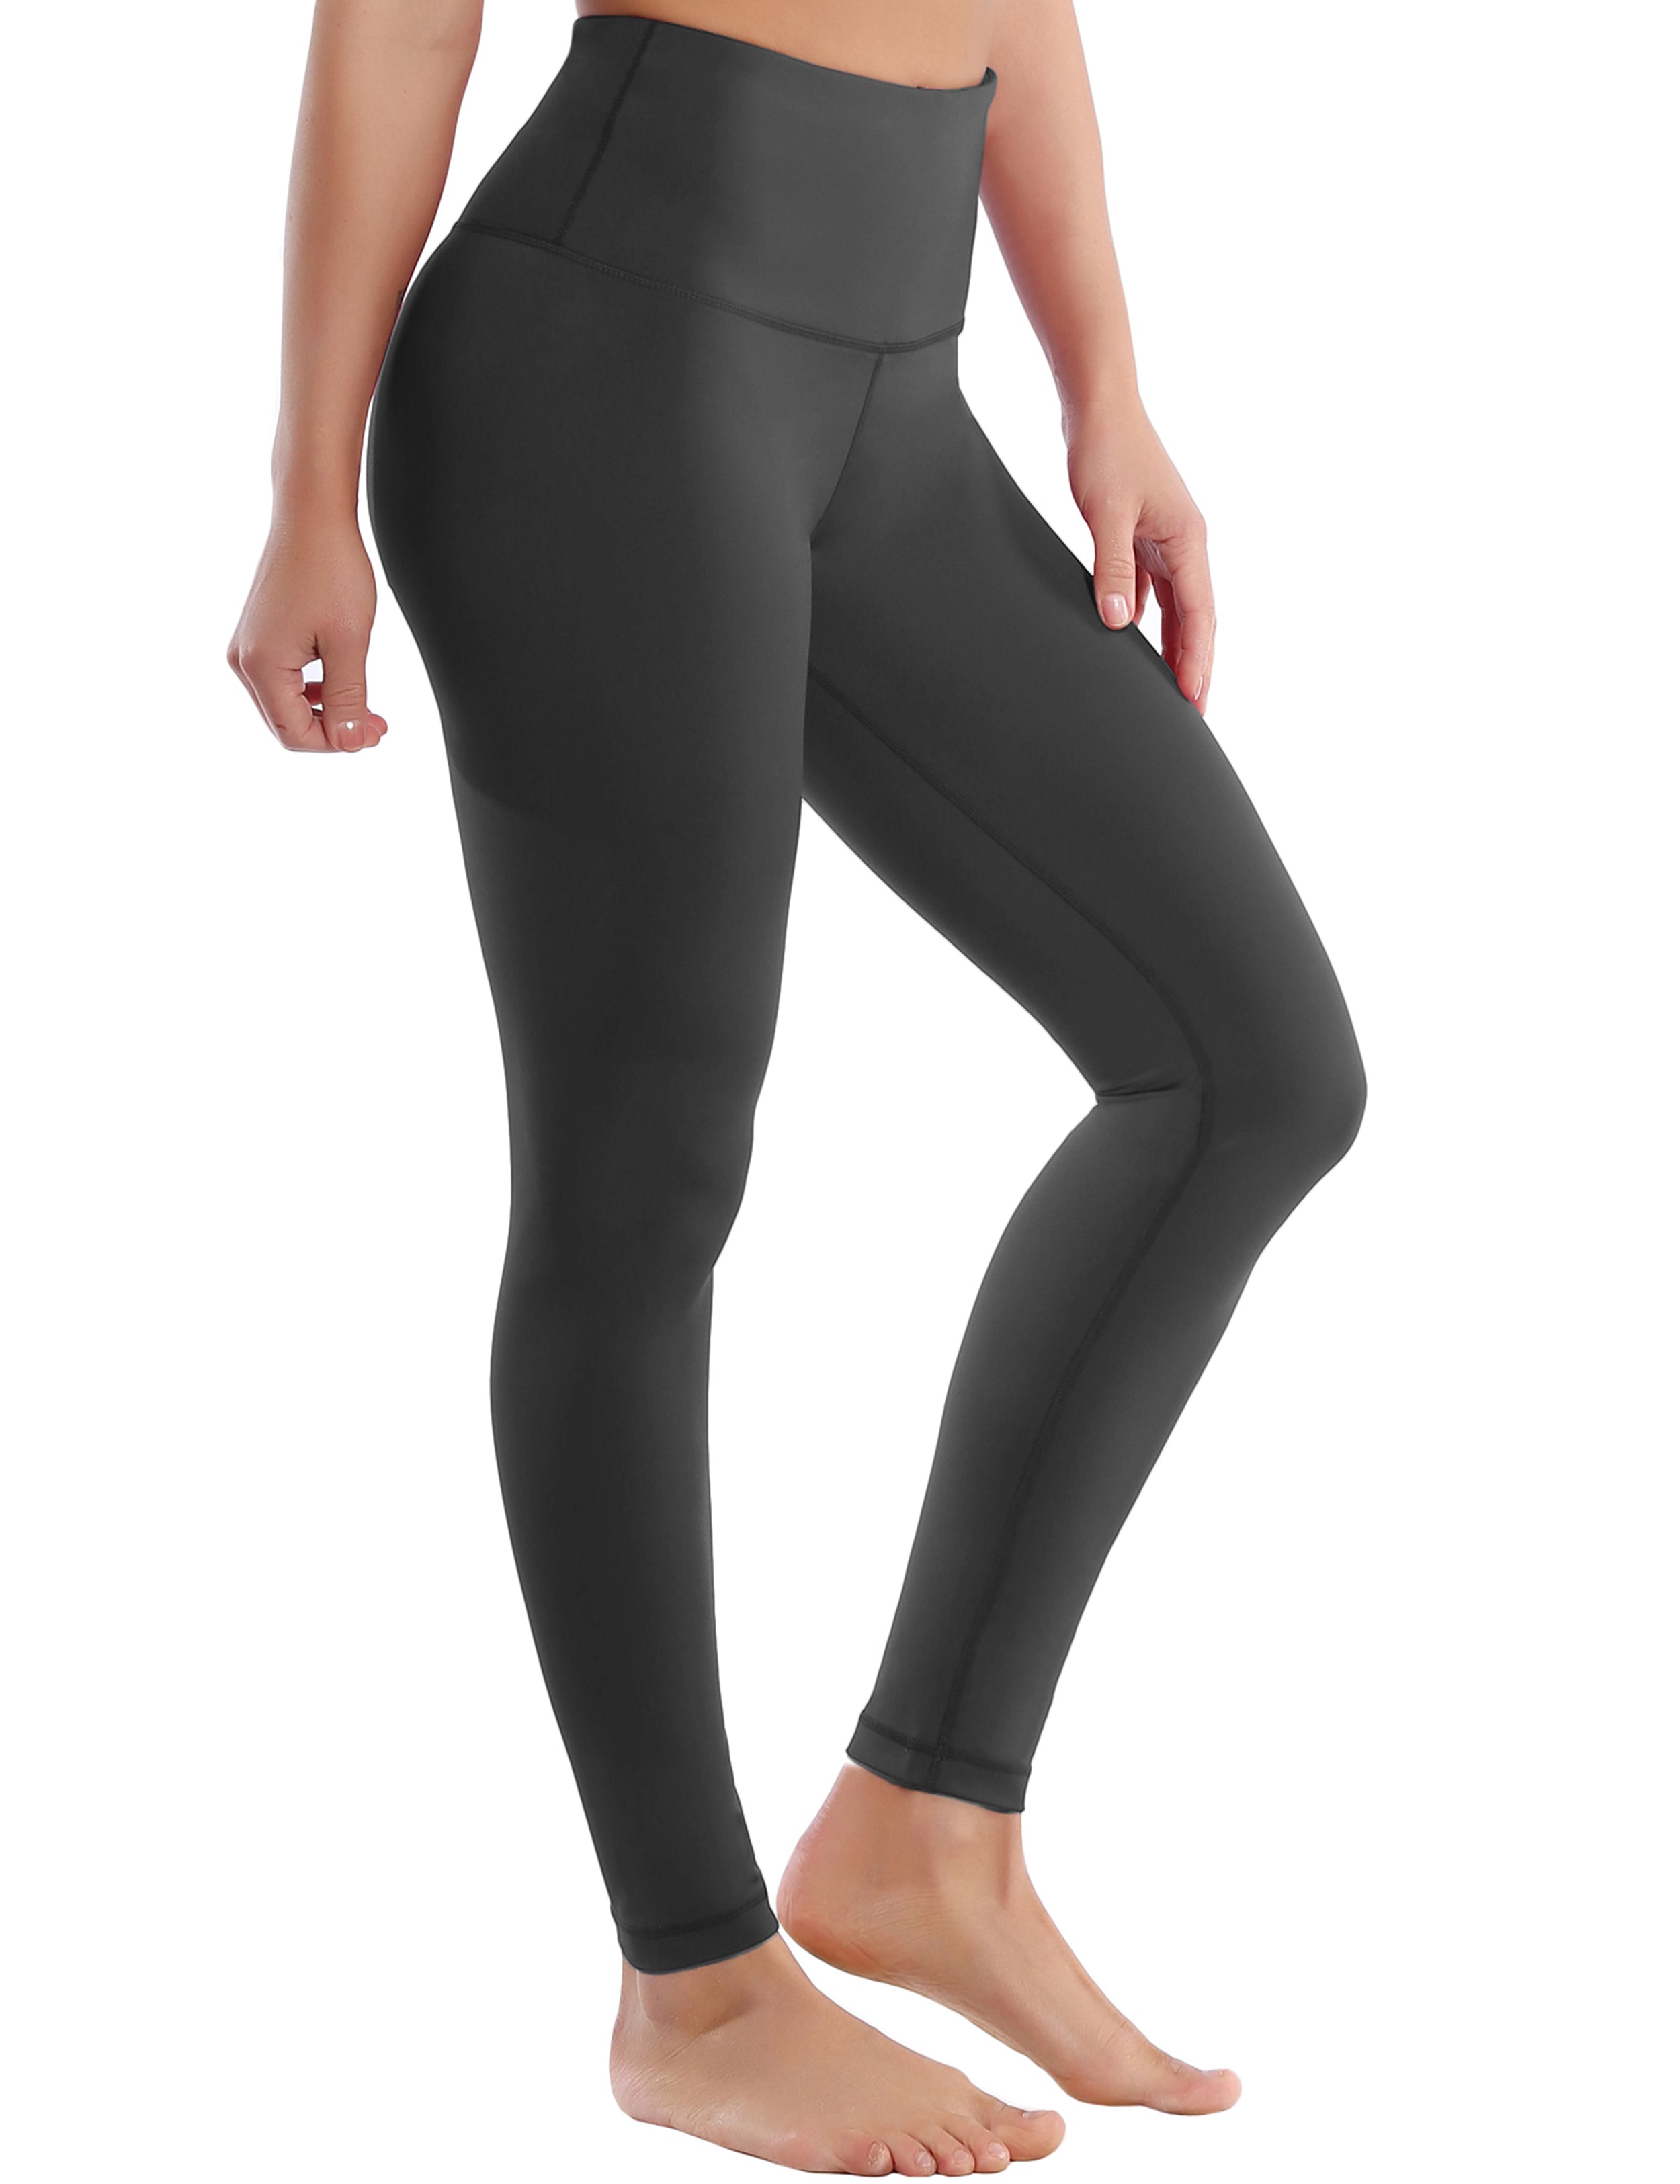 High Waist Yoga Pants shadowcharcoal 75%Nylon/25%Spandex Fabric doesn't attract lint easily 4-way stretch No see-through Moisture-wicking Tummy control Inner pocket Four lengths